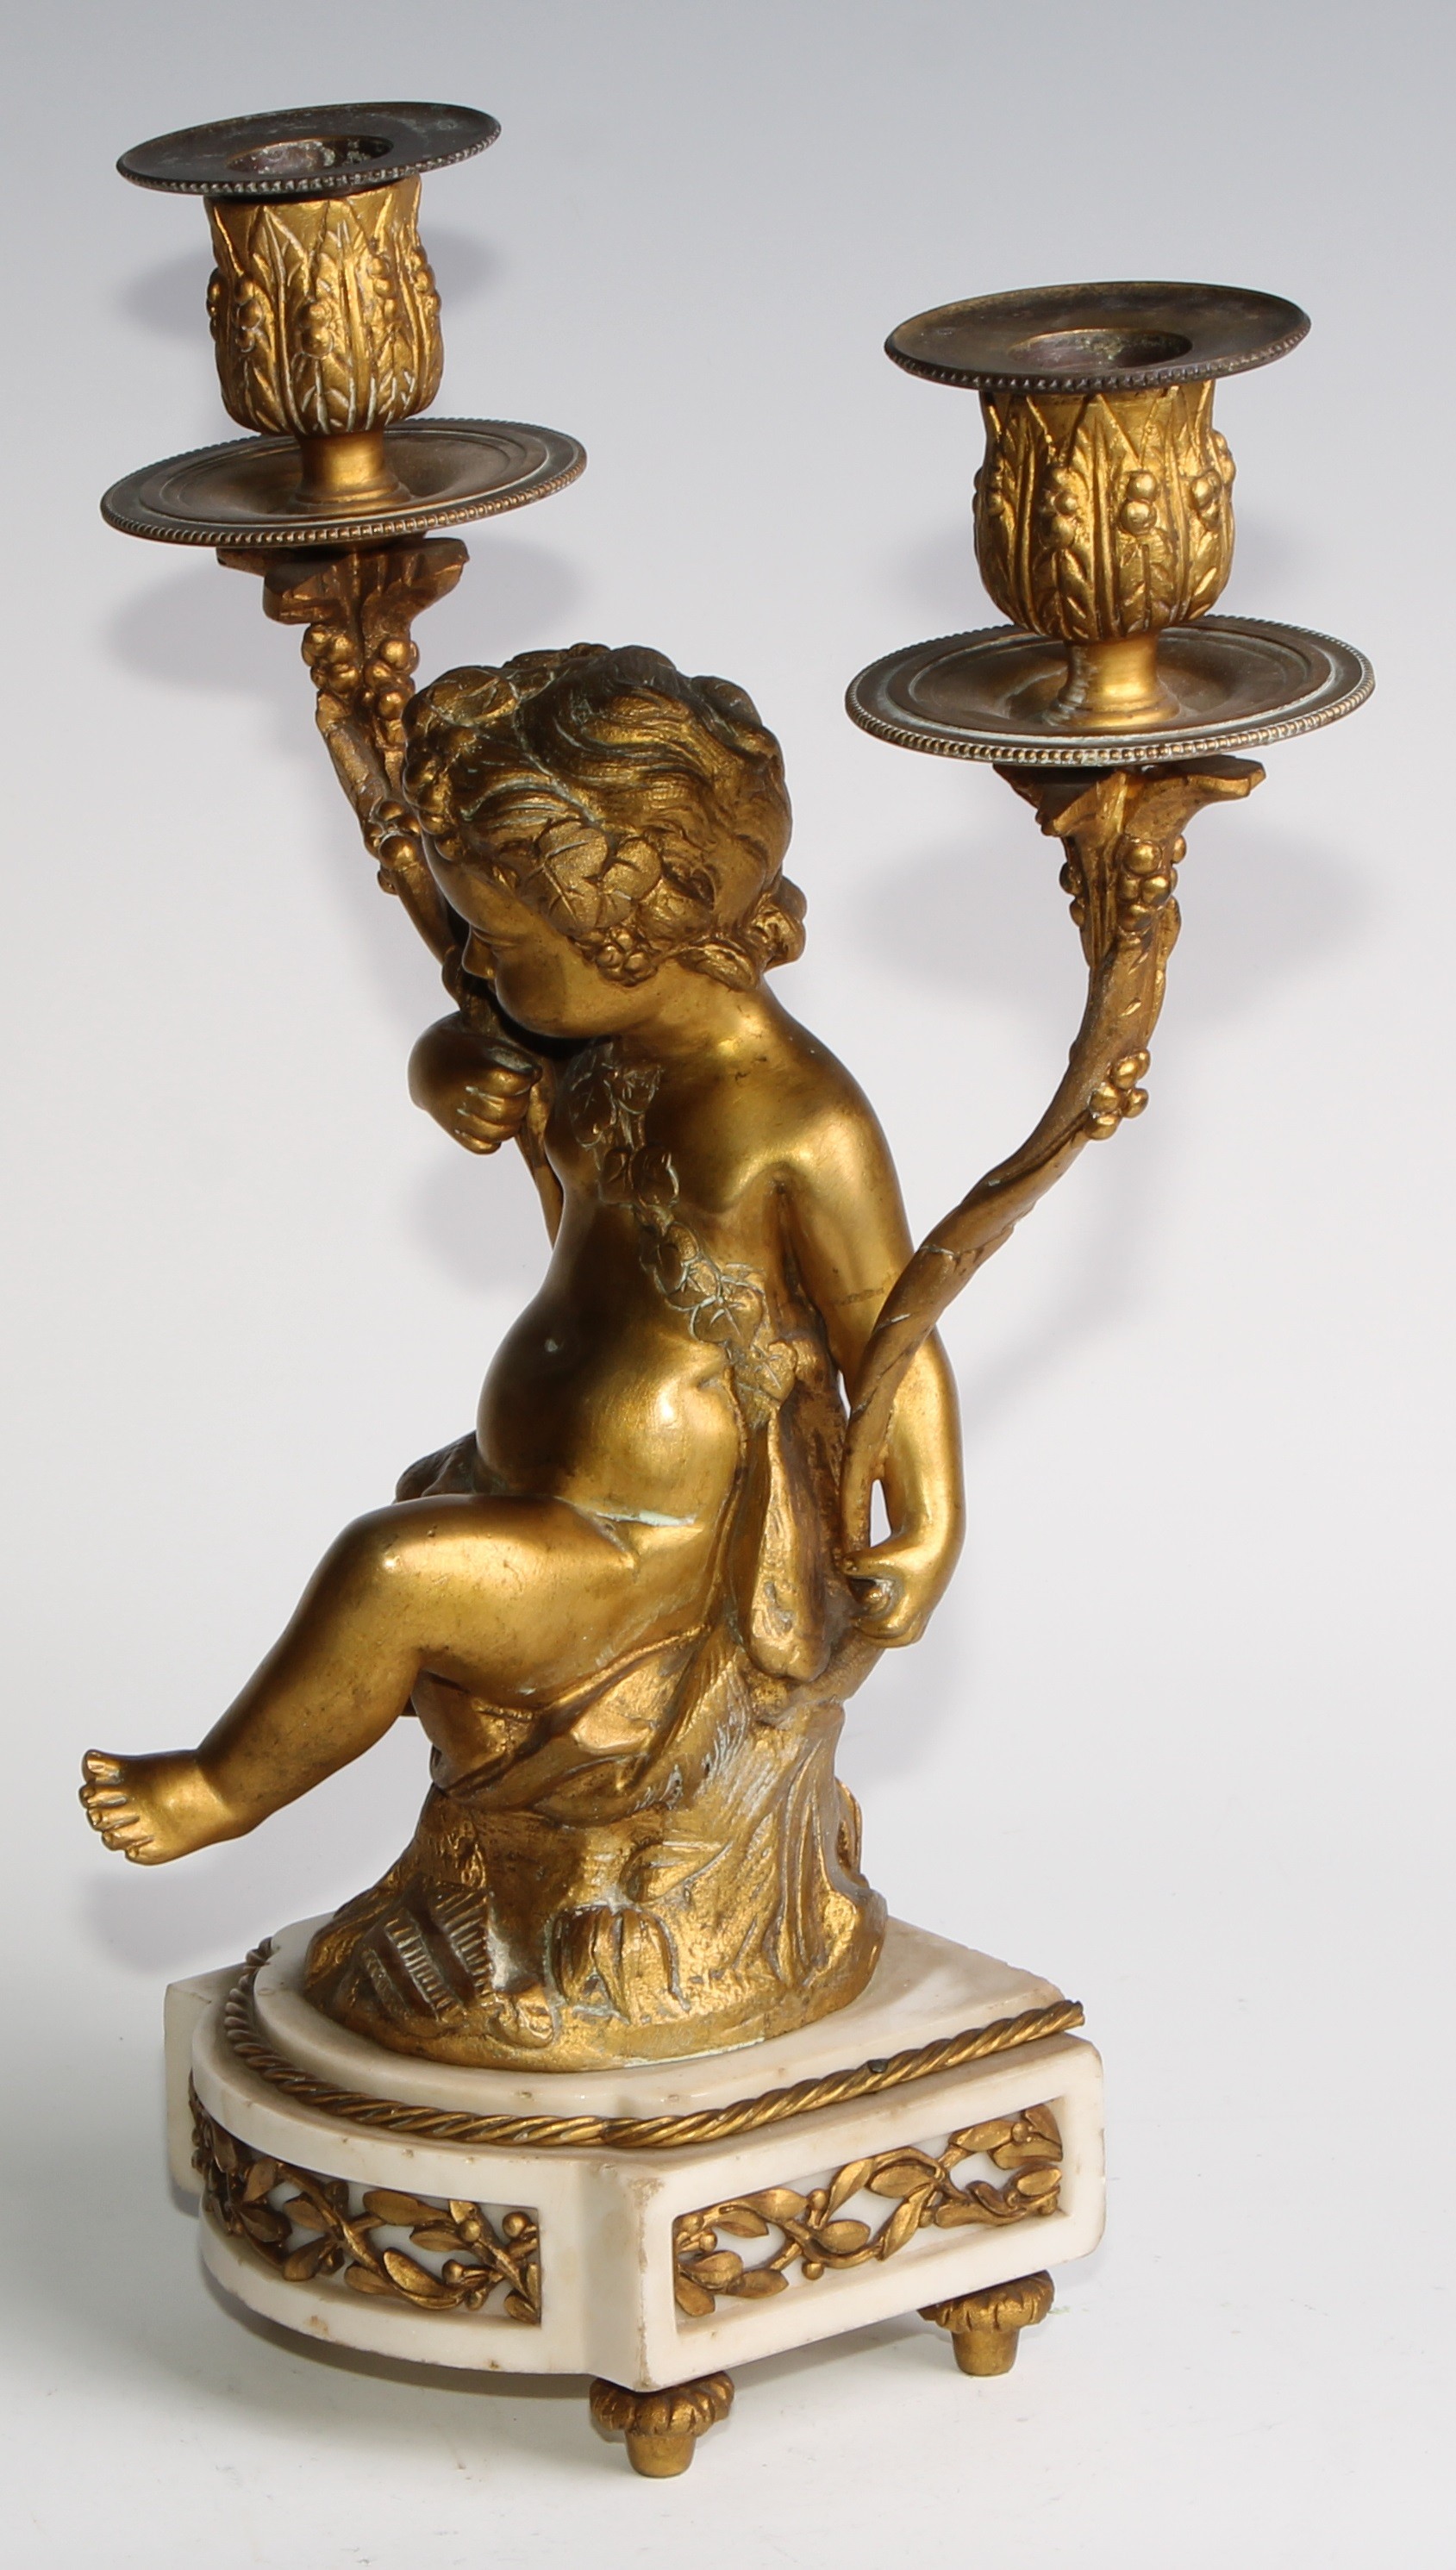 A pair of 19th century French bronze figural two-light candelabra, after Clodion (1738 - 1814), - Image 10 of 12